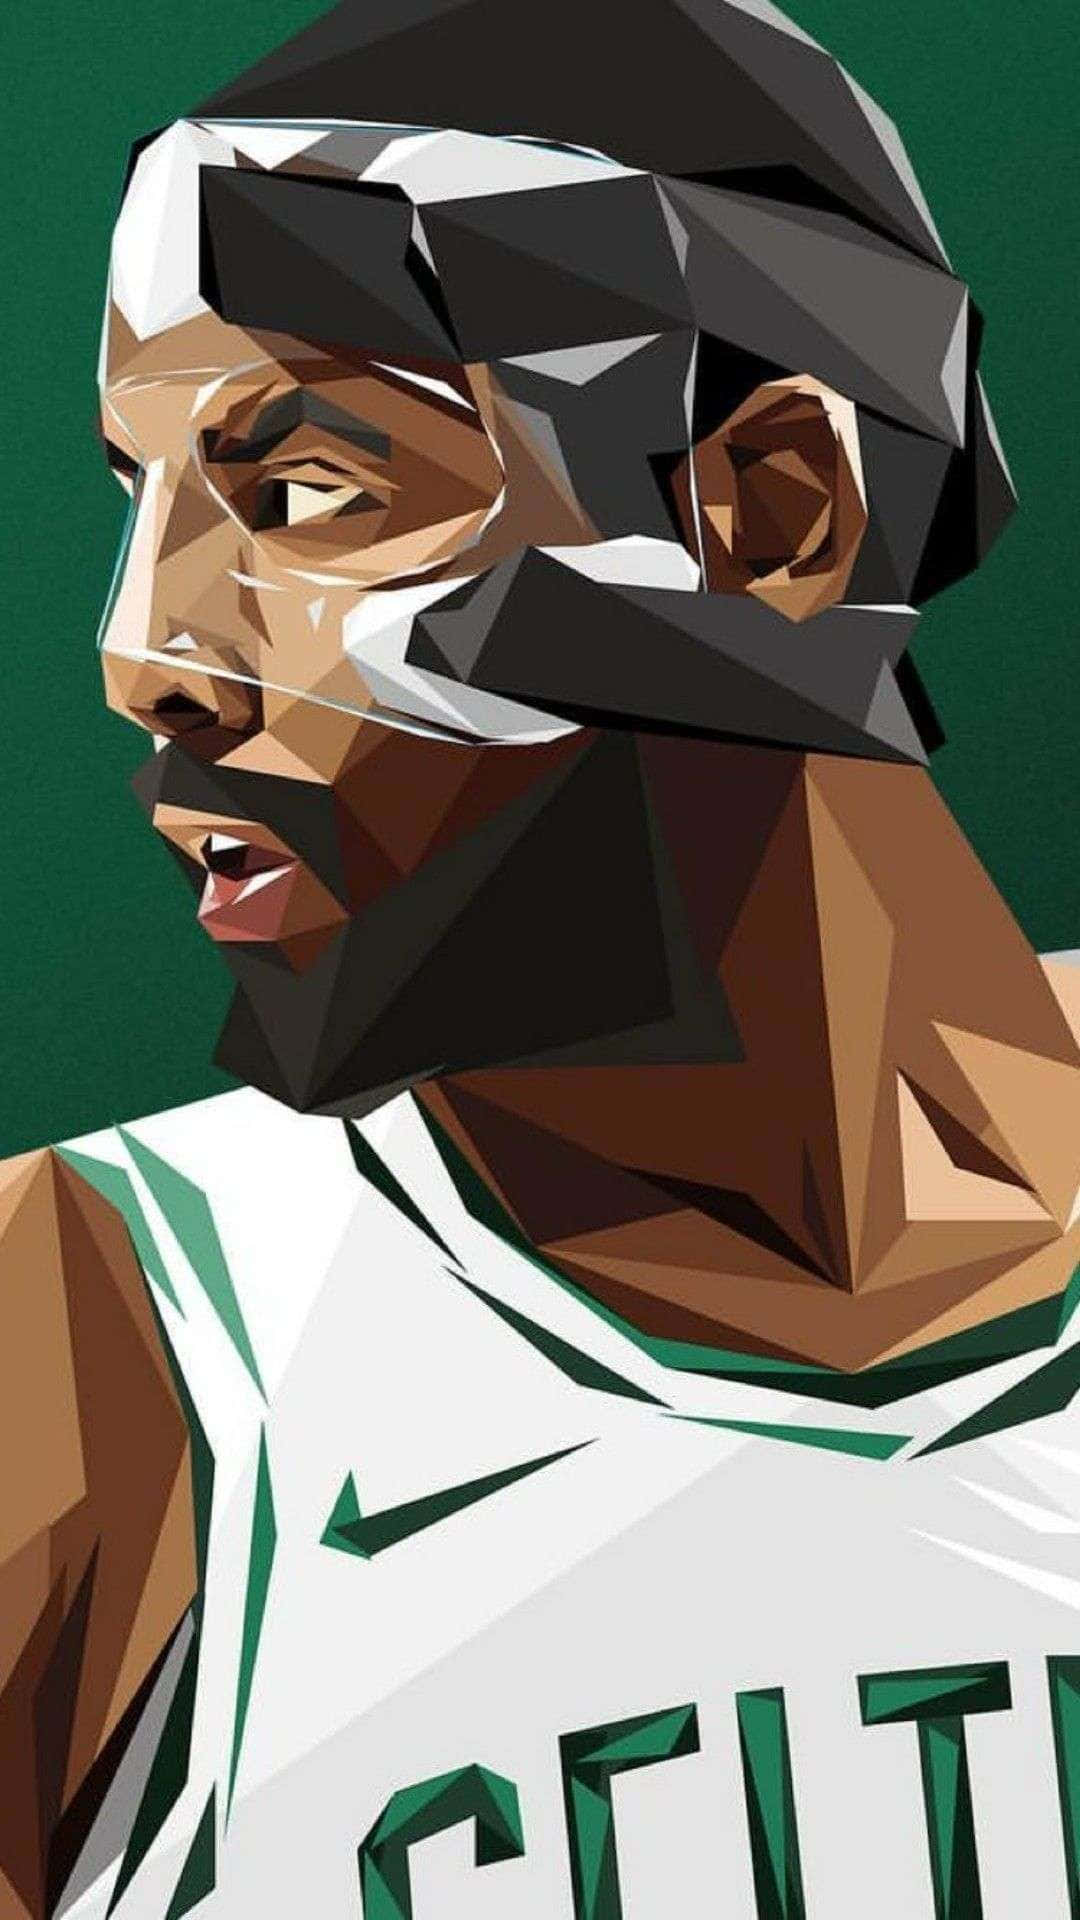 Kyrie Irving with his New Iphone Wallpaper